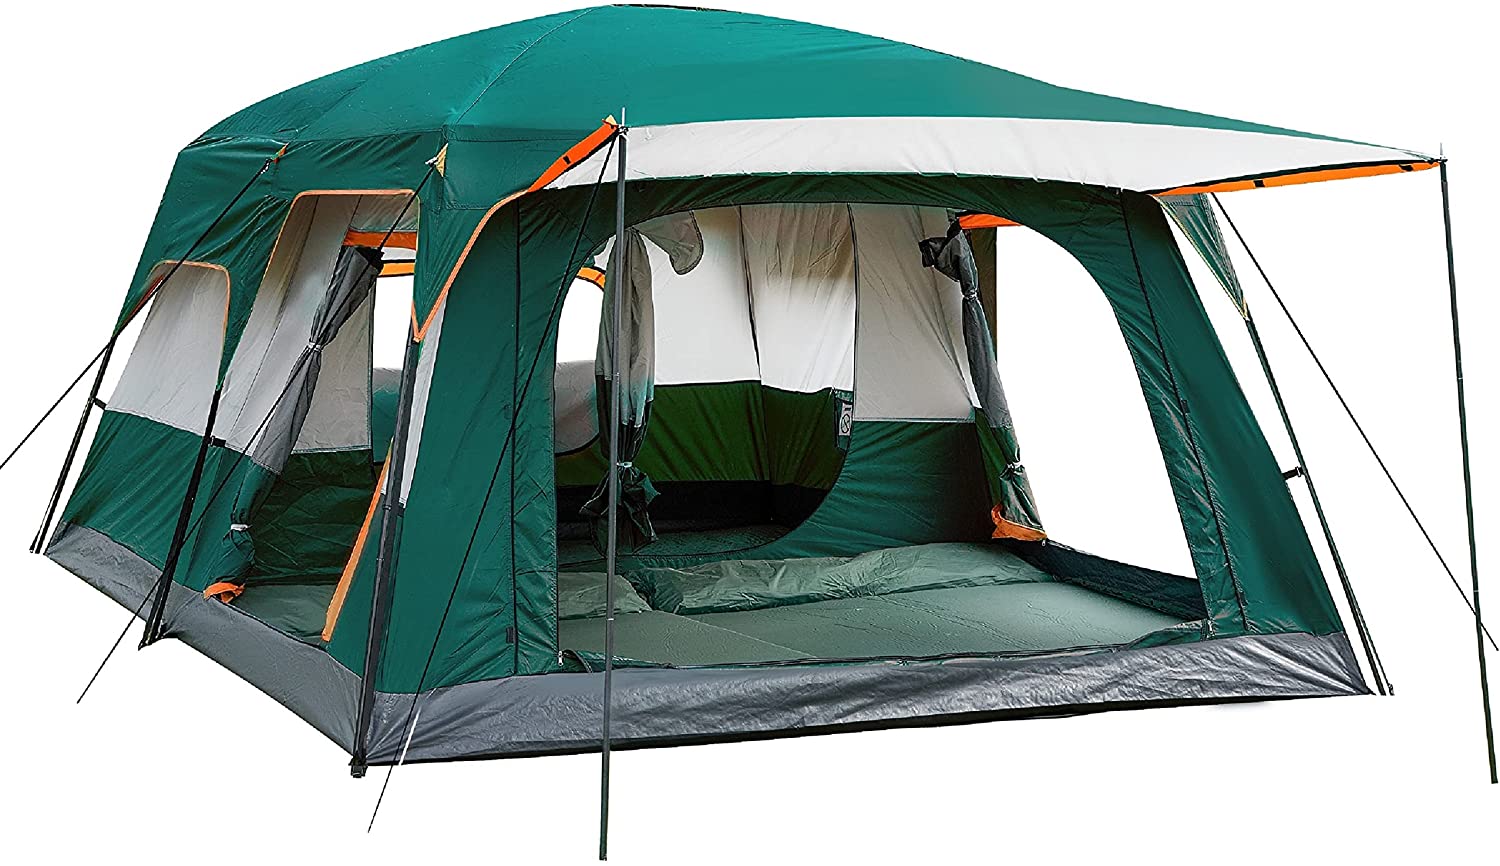 Core 12 Person Extra Large Straight Wall Cabin Tent - 16' x 11' Opinion